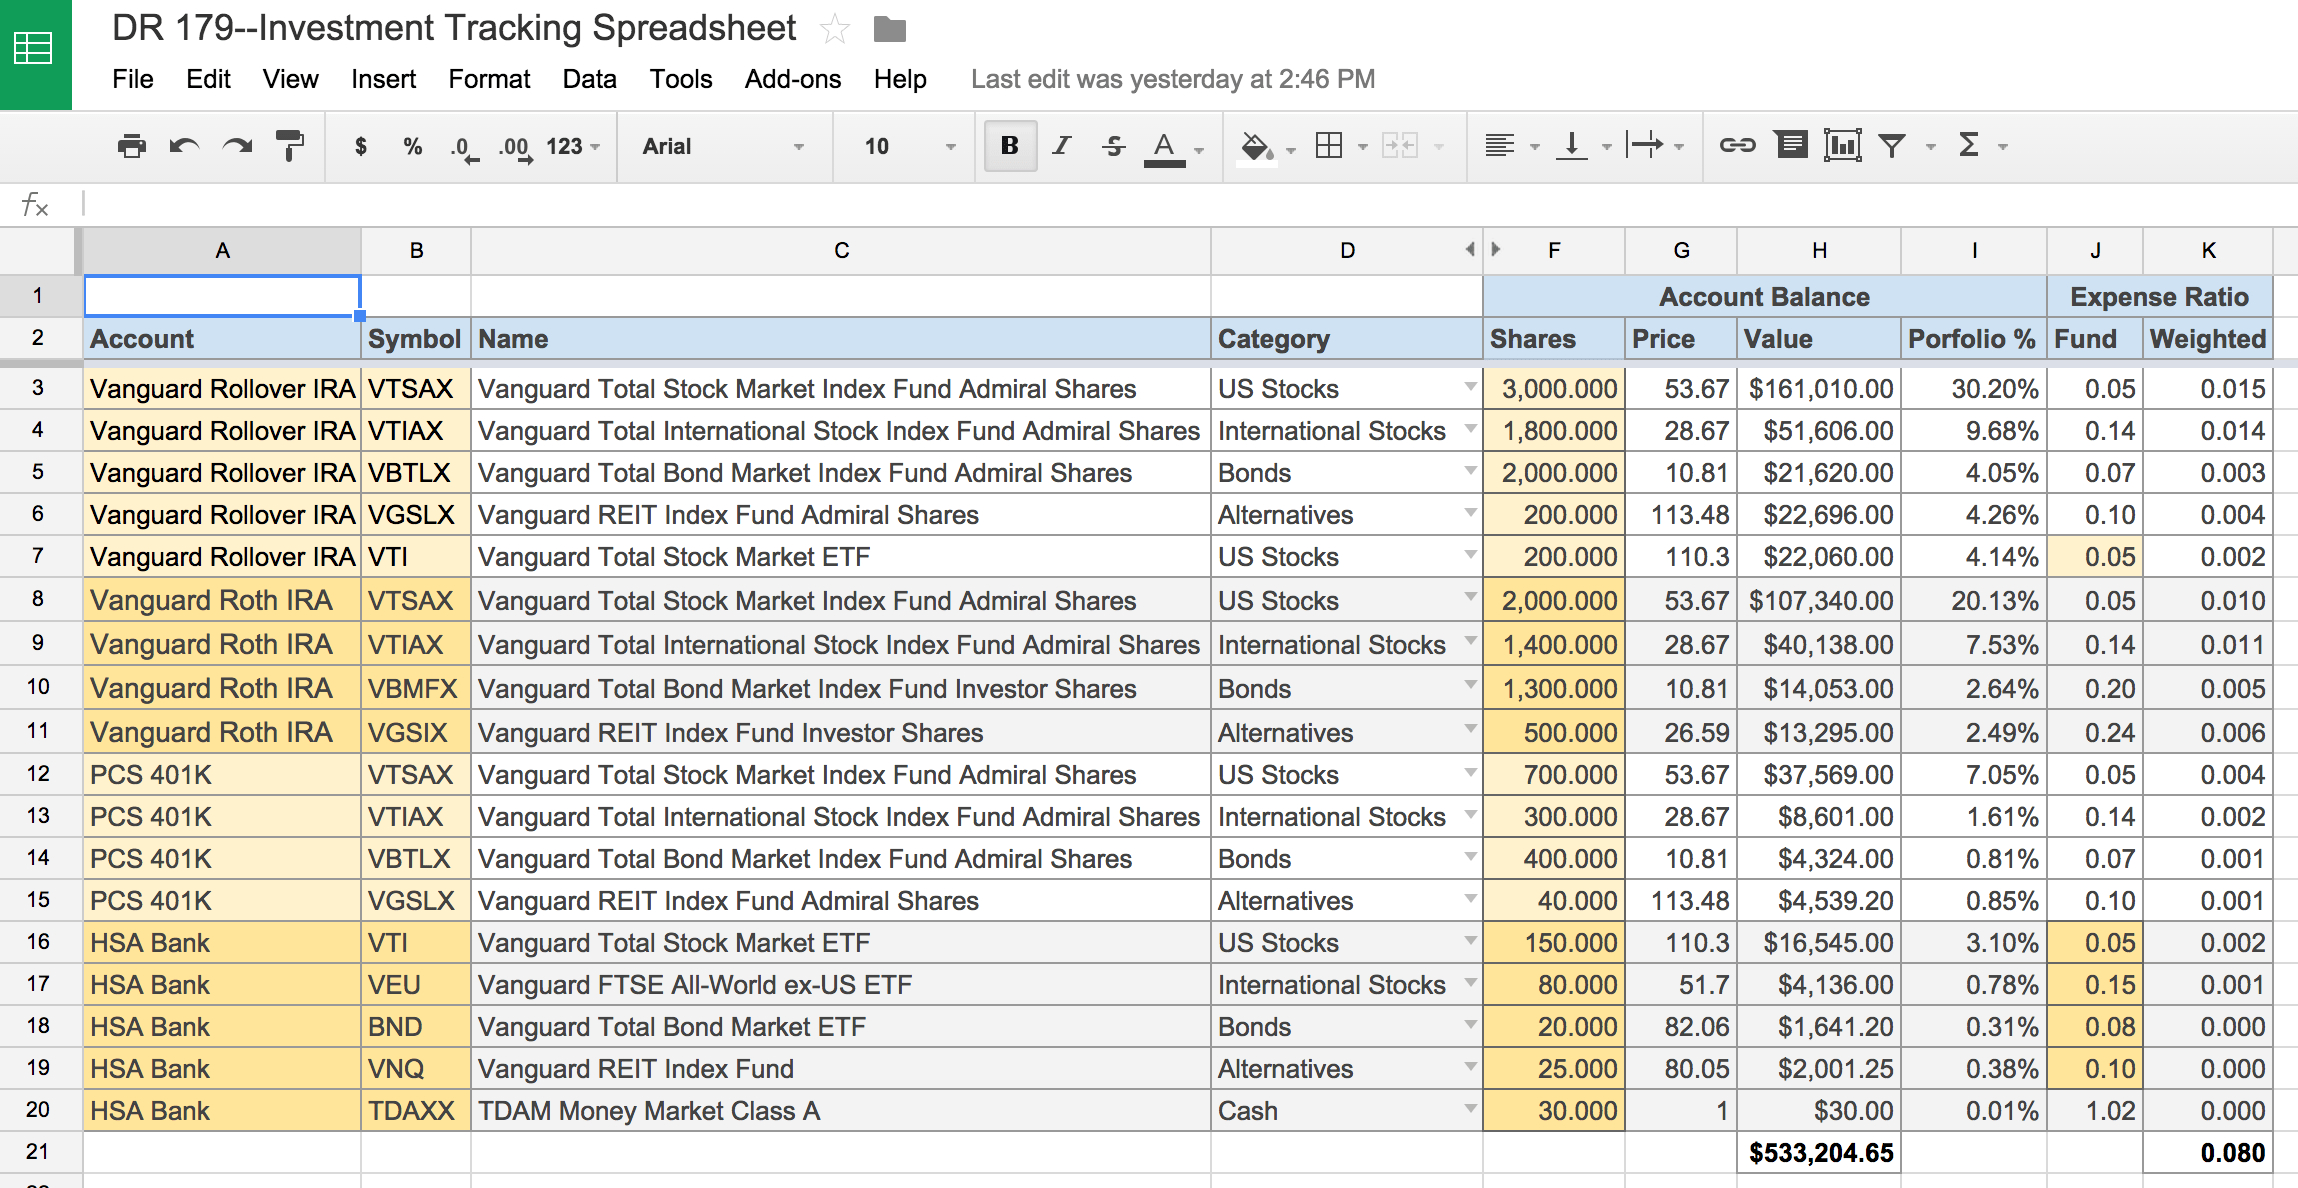 Share Tracking Spreadsheet For An Awesome And Free Investment Tracking Spreadsheet